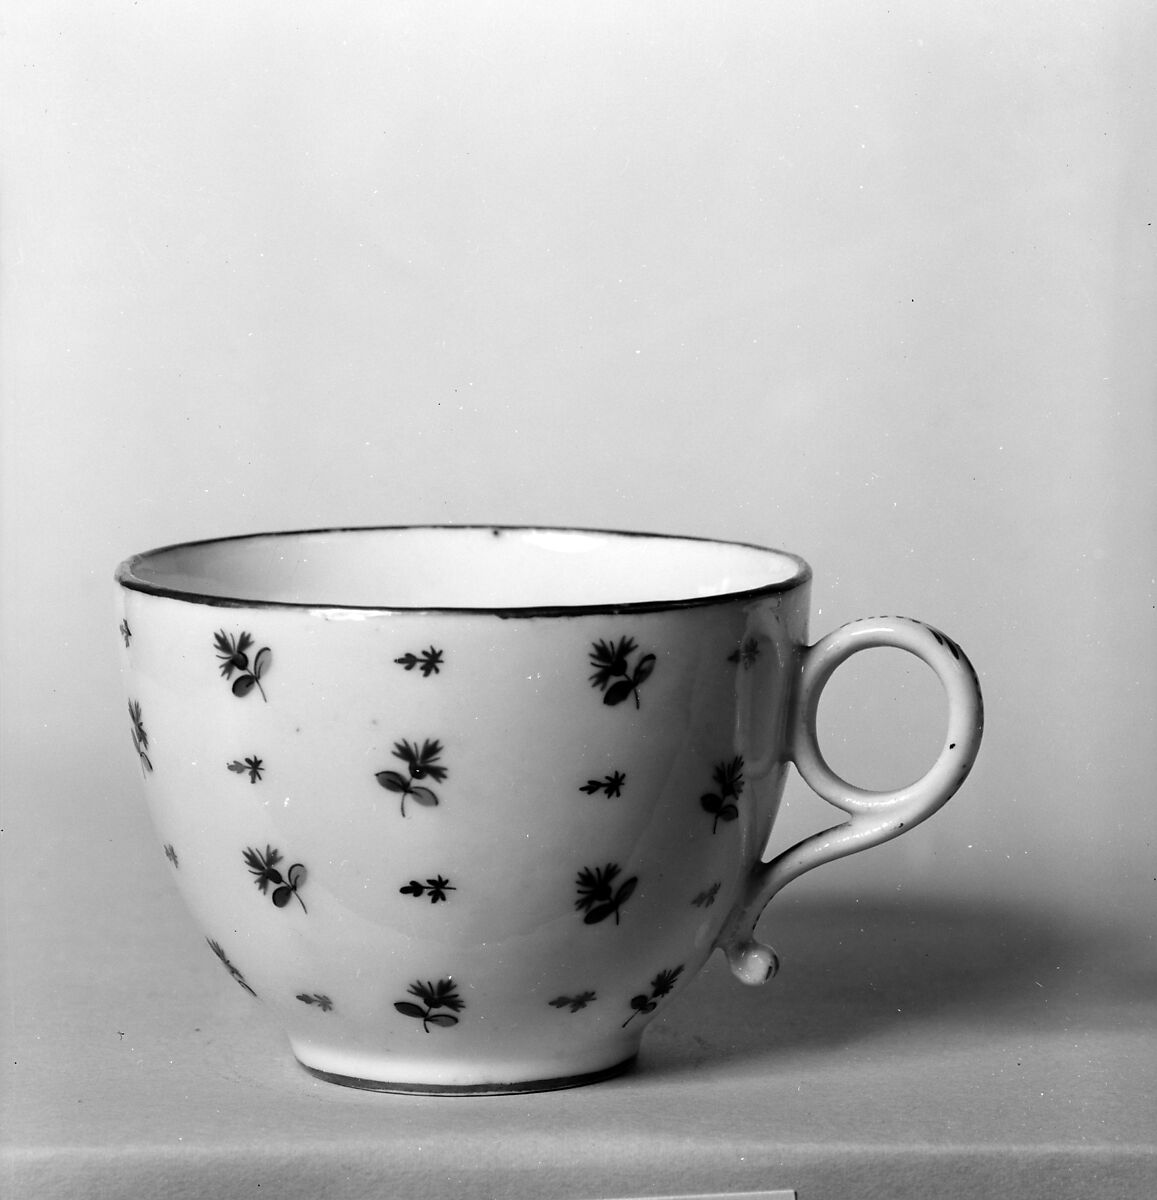 Cup and Saucer, Porcelain, French, possibly 